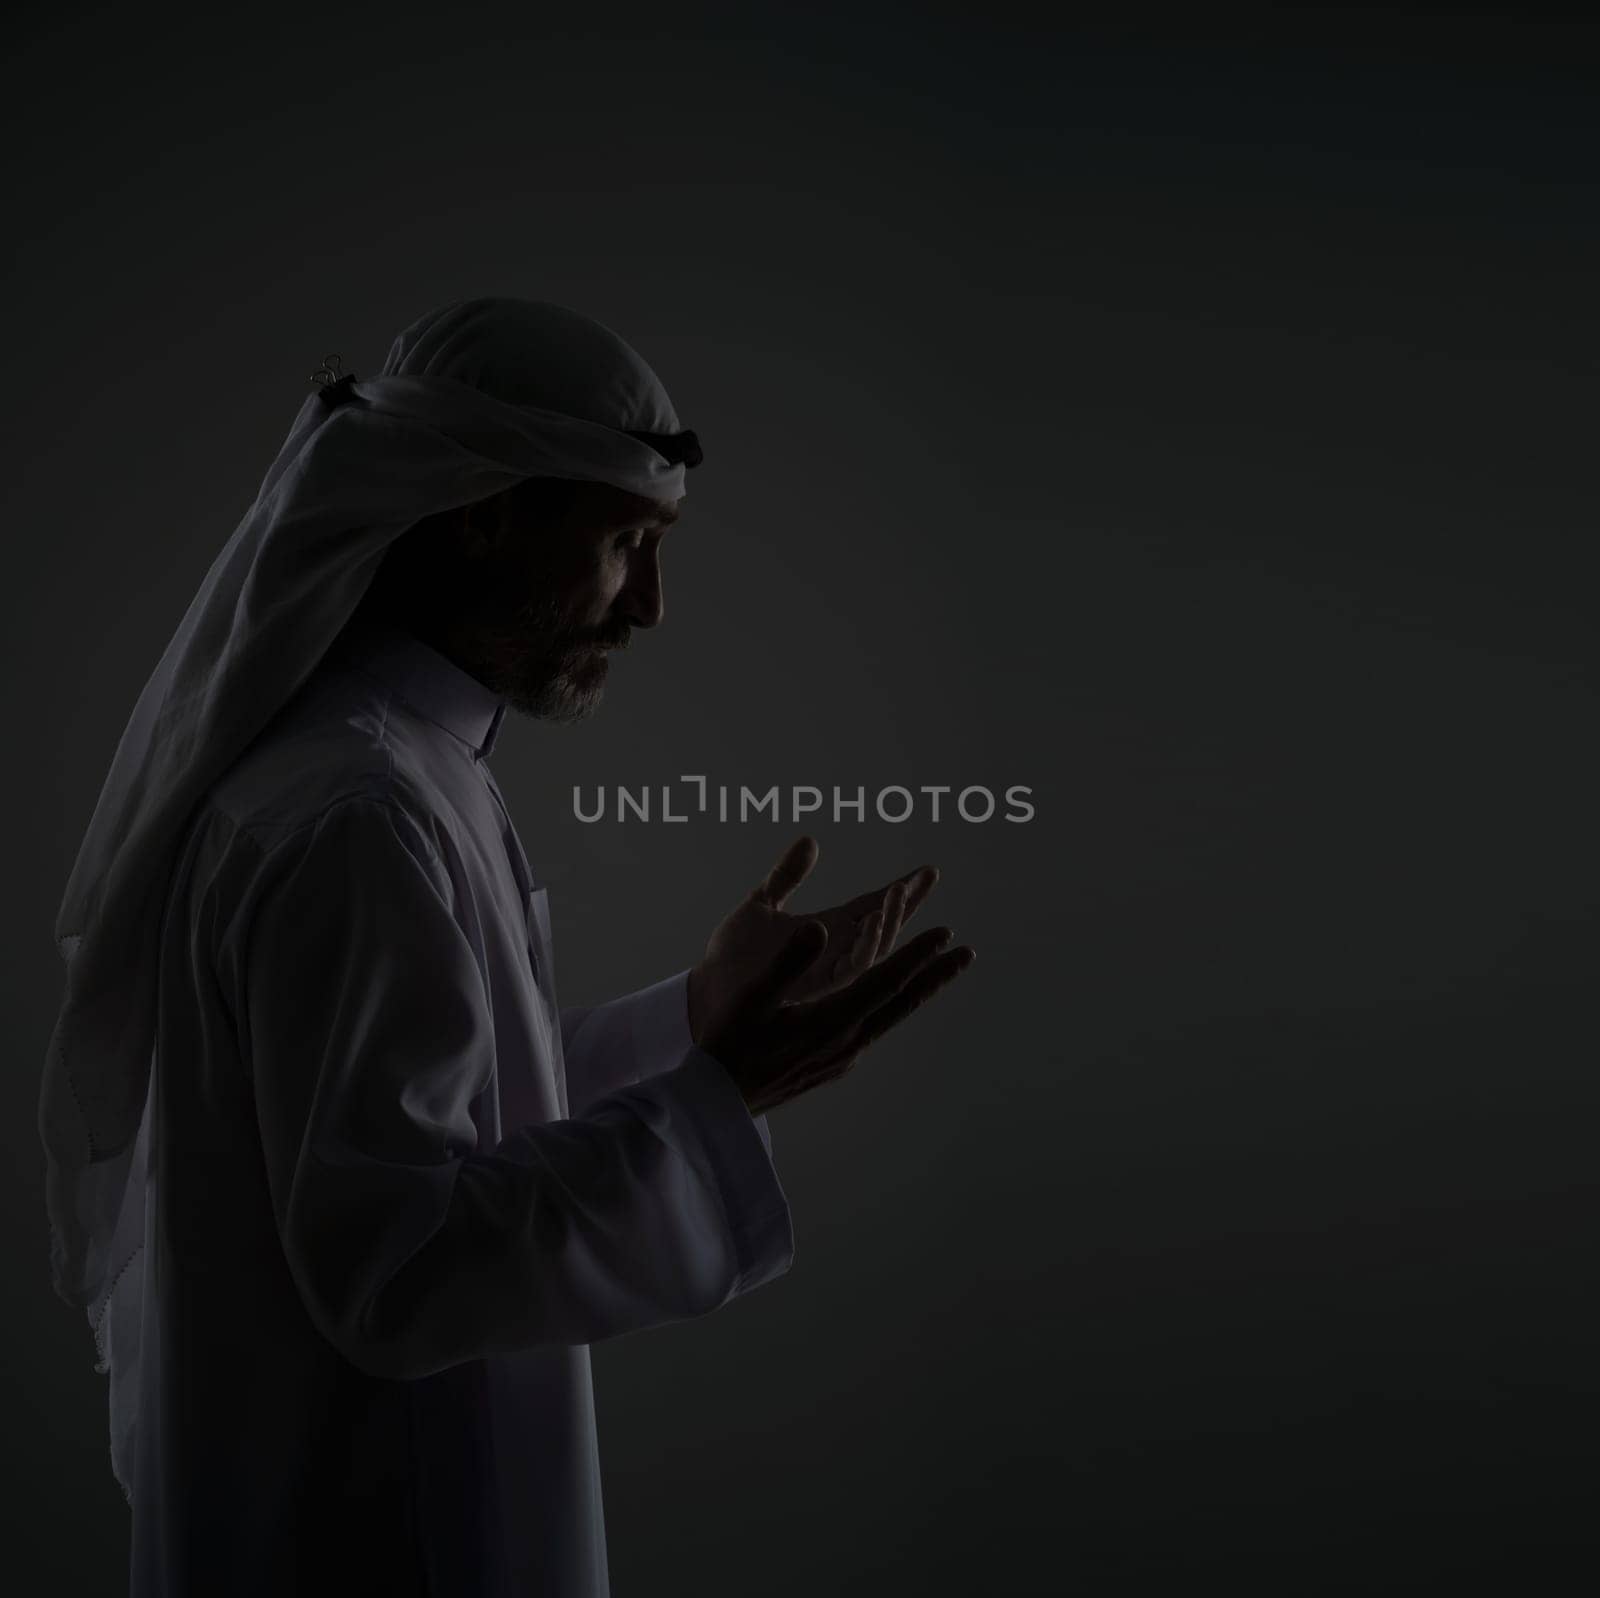 Muslim Arab man is prayer, raising hands to face with peaceful, serene expression. Copy space and portrays the man's devotion and spirituality in traditional Islamic context. Black and white portrait by LipikStockMedia